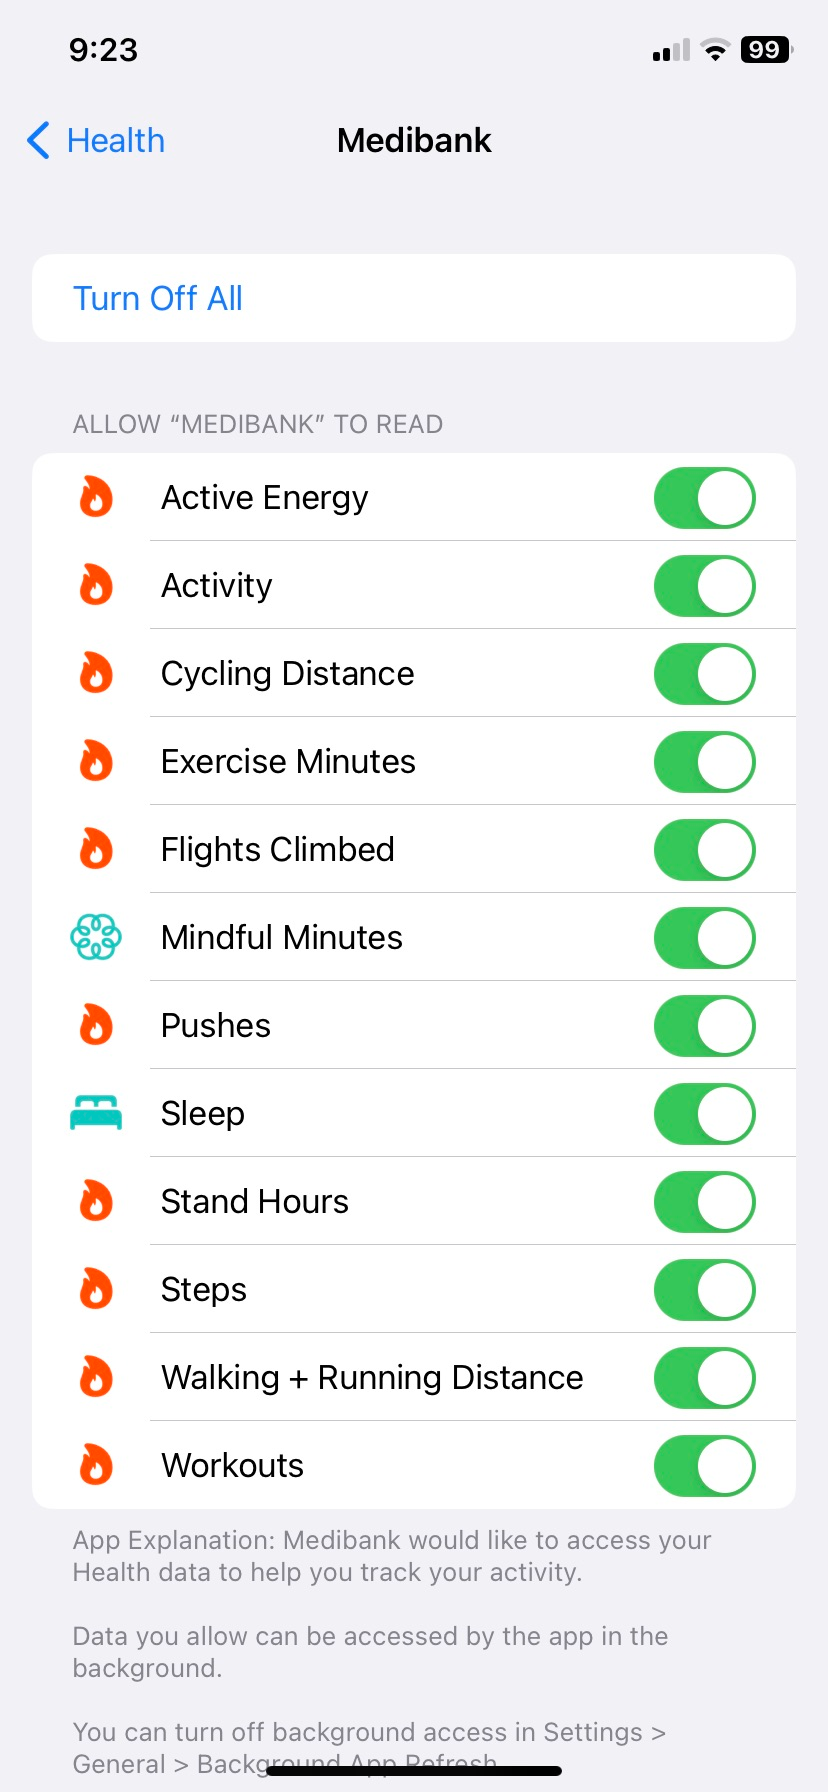 Turn on the toggles for Activity, Exercise Minutes and Workouts under the Medibank option, under health, under the Security & Privacy settings app on iPhone